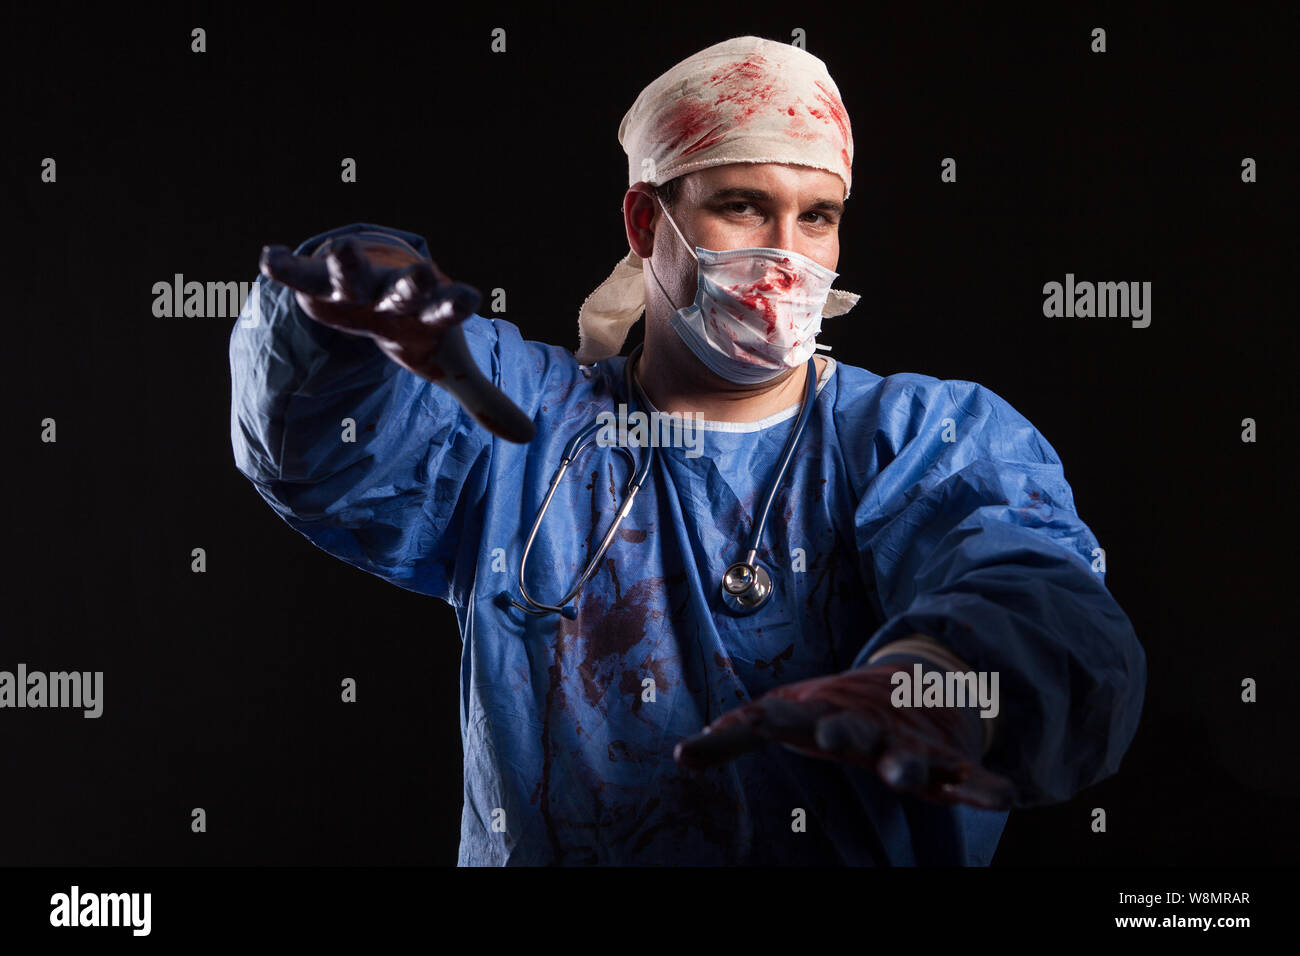 Crazy Doctor with a surgeon mask and scrubs splattered with blood for halloween. Dangerous doctor over black background. Stock Photo